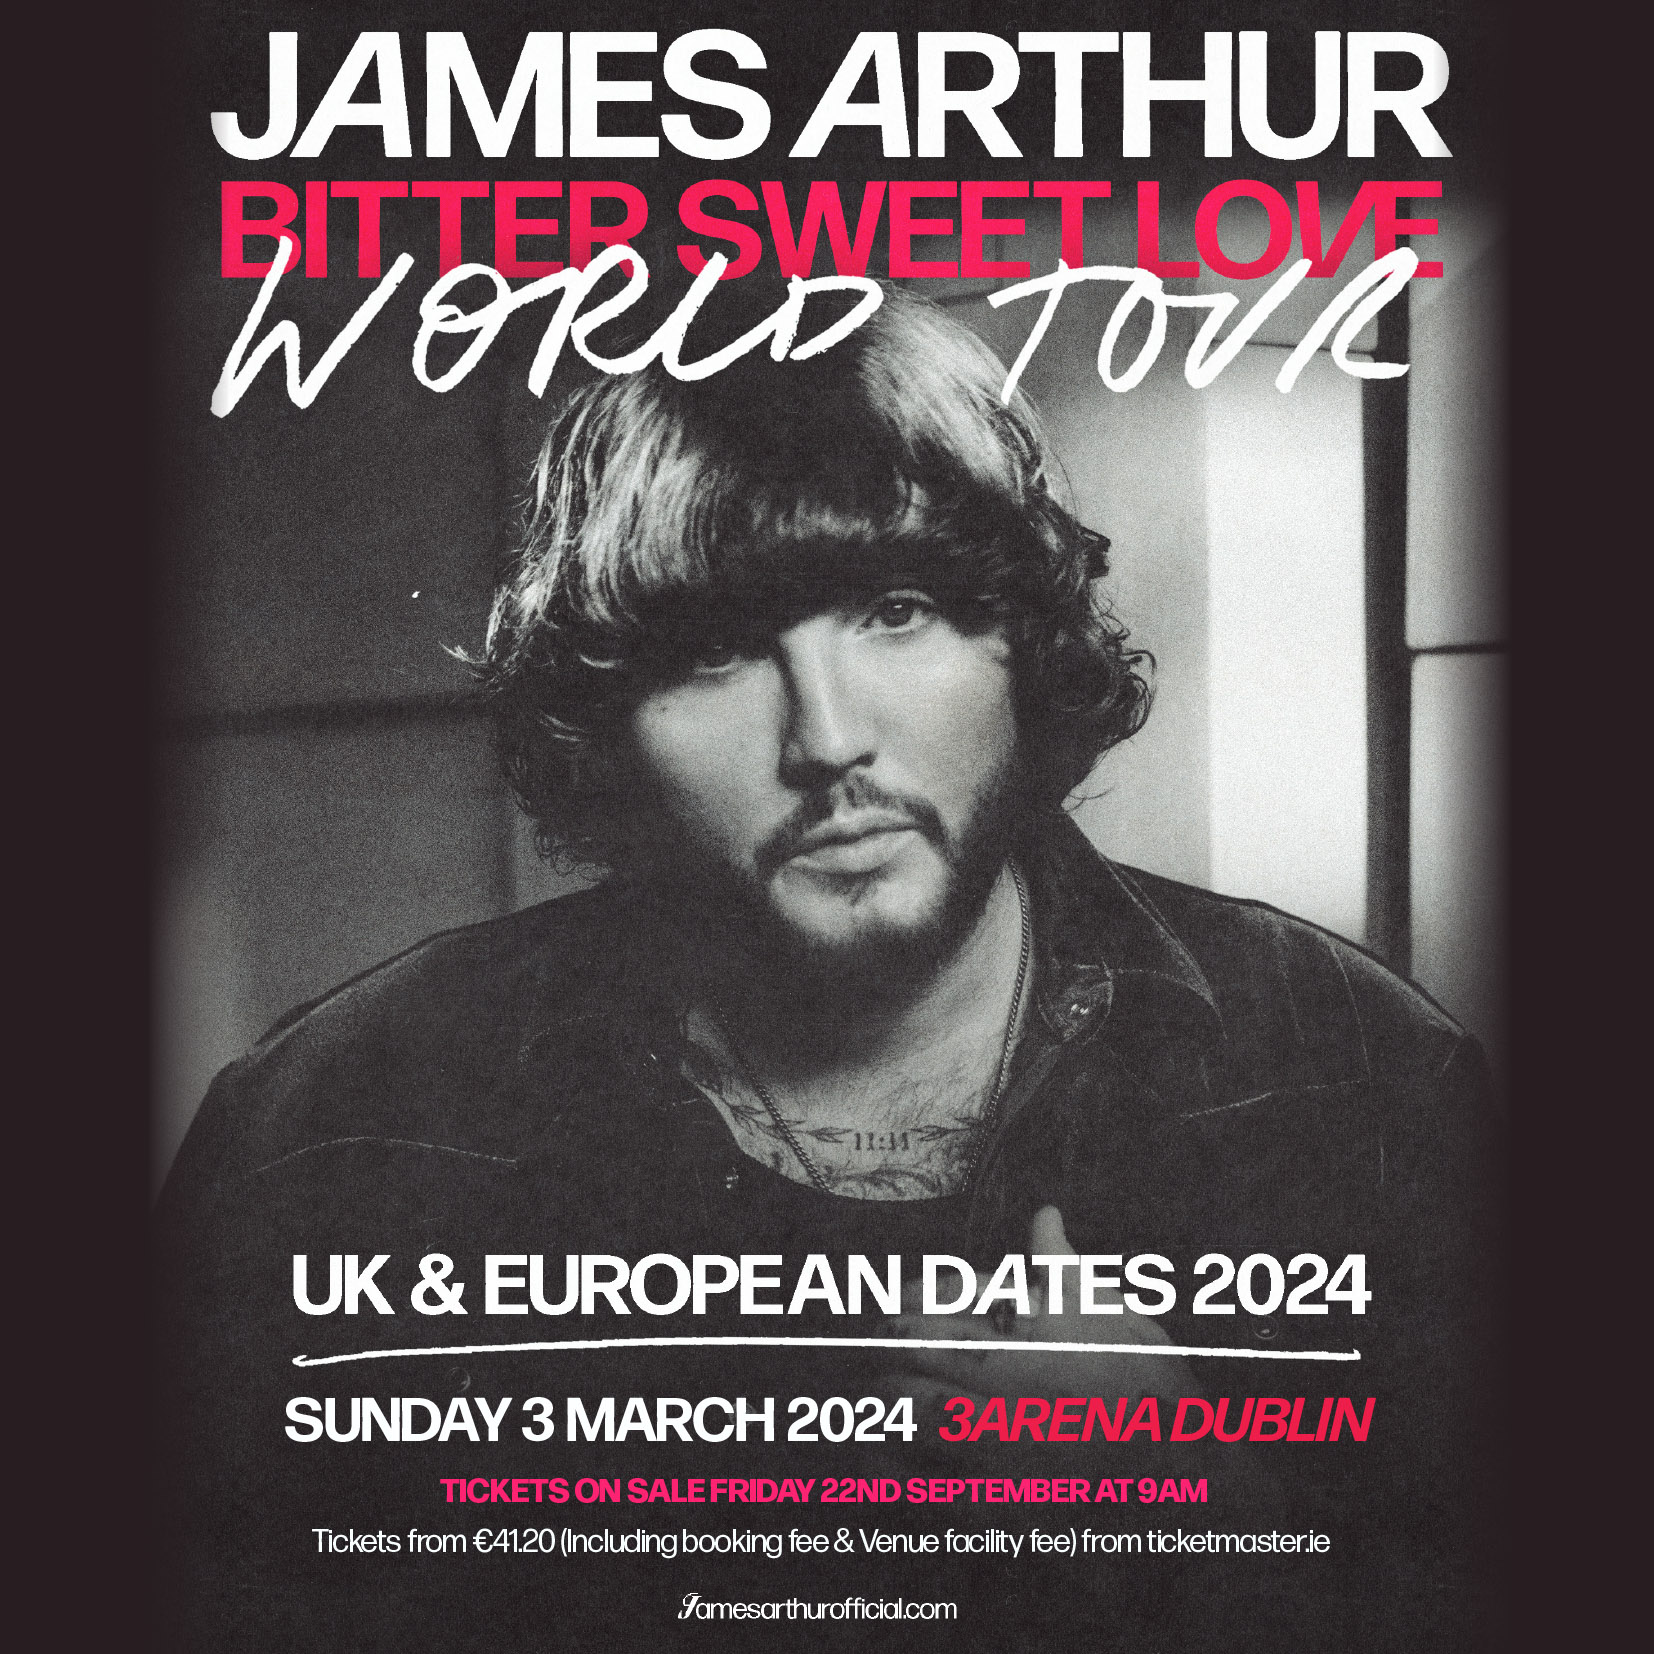 JUST ANNOUNCED :: James Arthur : : 3Arena 3 March 2024 the Bitter Sweet Love World Tour